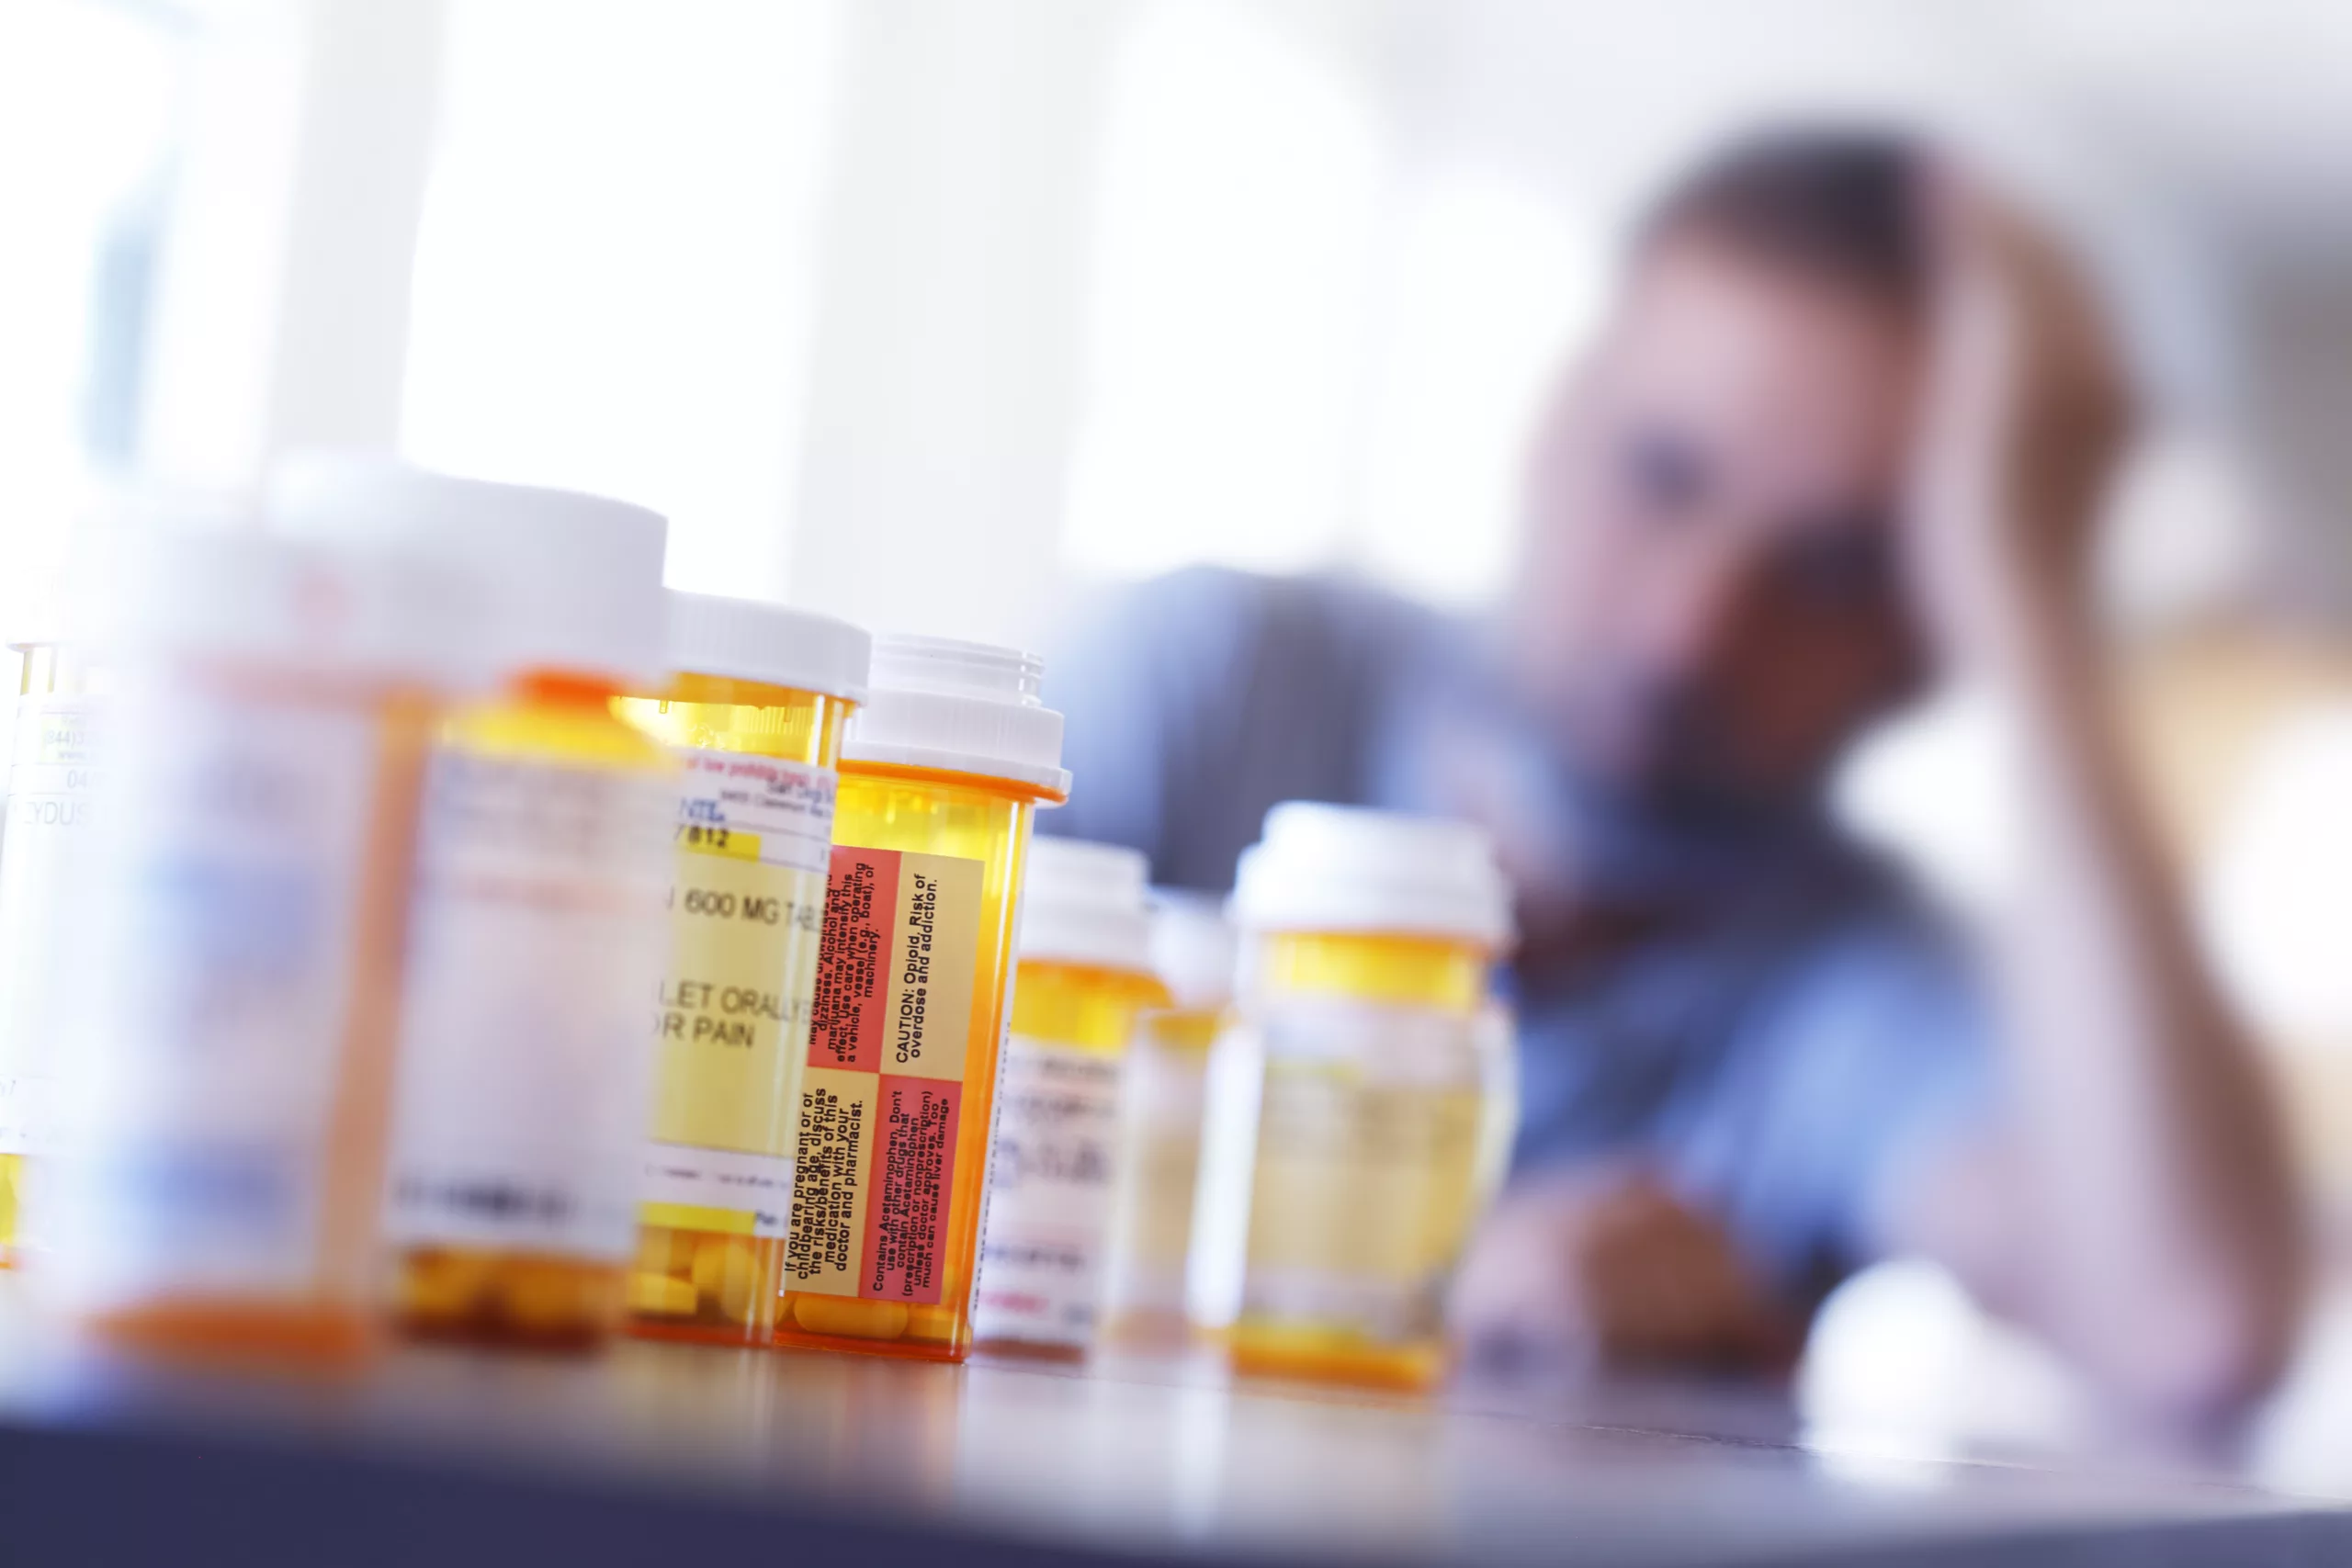 A large group of prescription medication bottles sit on a table in front of a distraught man who is leaning on his hand as he sits at his dining room table. The image is photographed with a very shallow depth of field with the focus being on the pill bottles in the foreground.